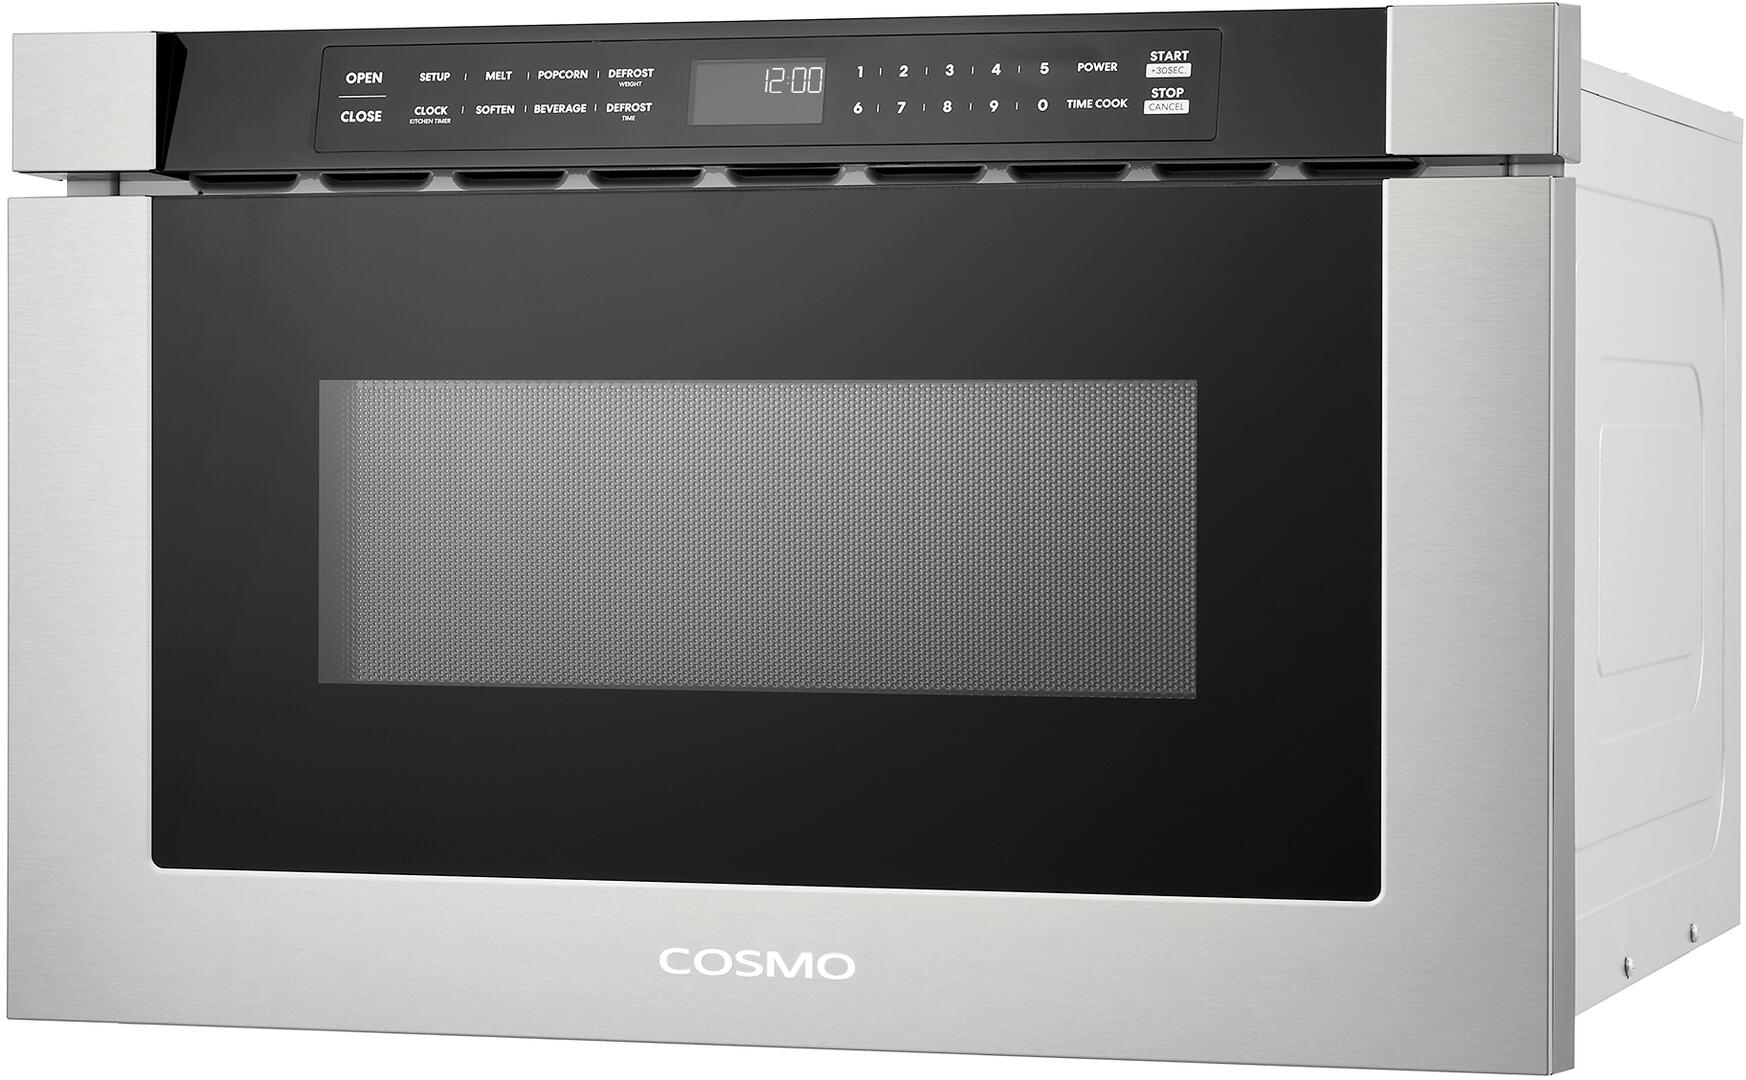 Galanz ToastWave 1.2-cu ft 1000-Watt Air Fry Sensor Cooking Controls  Countertop Convection Microwave (Stainless Steel Black) in the Countertop  Microwaves department at